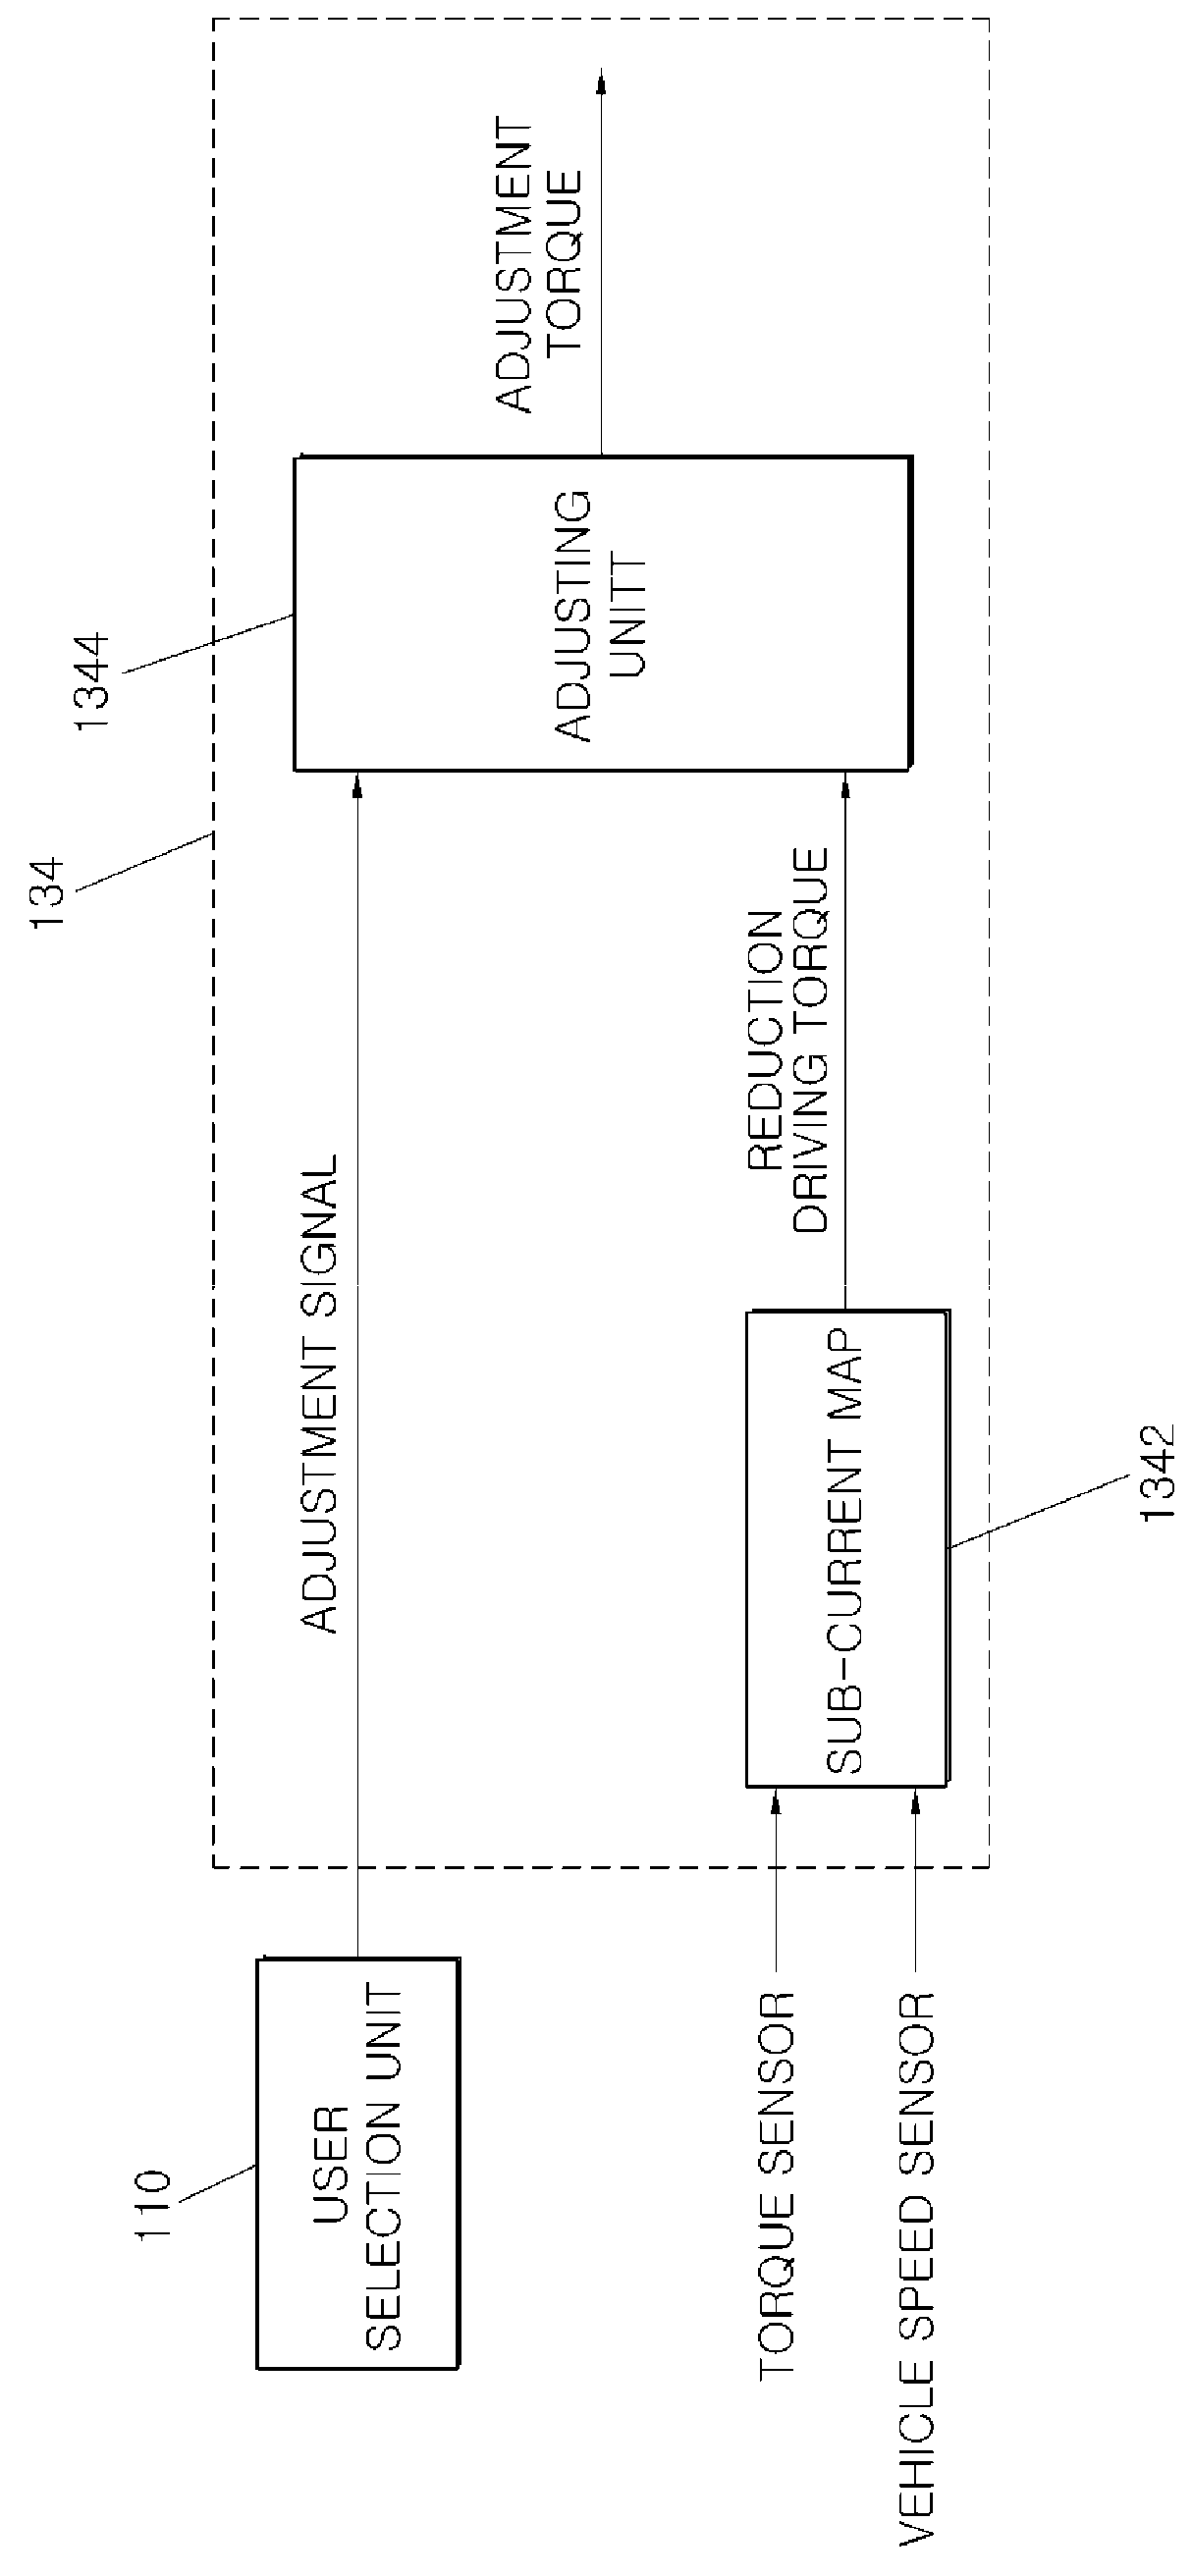 Motor driven power steering tunable by user